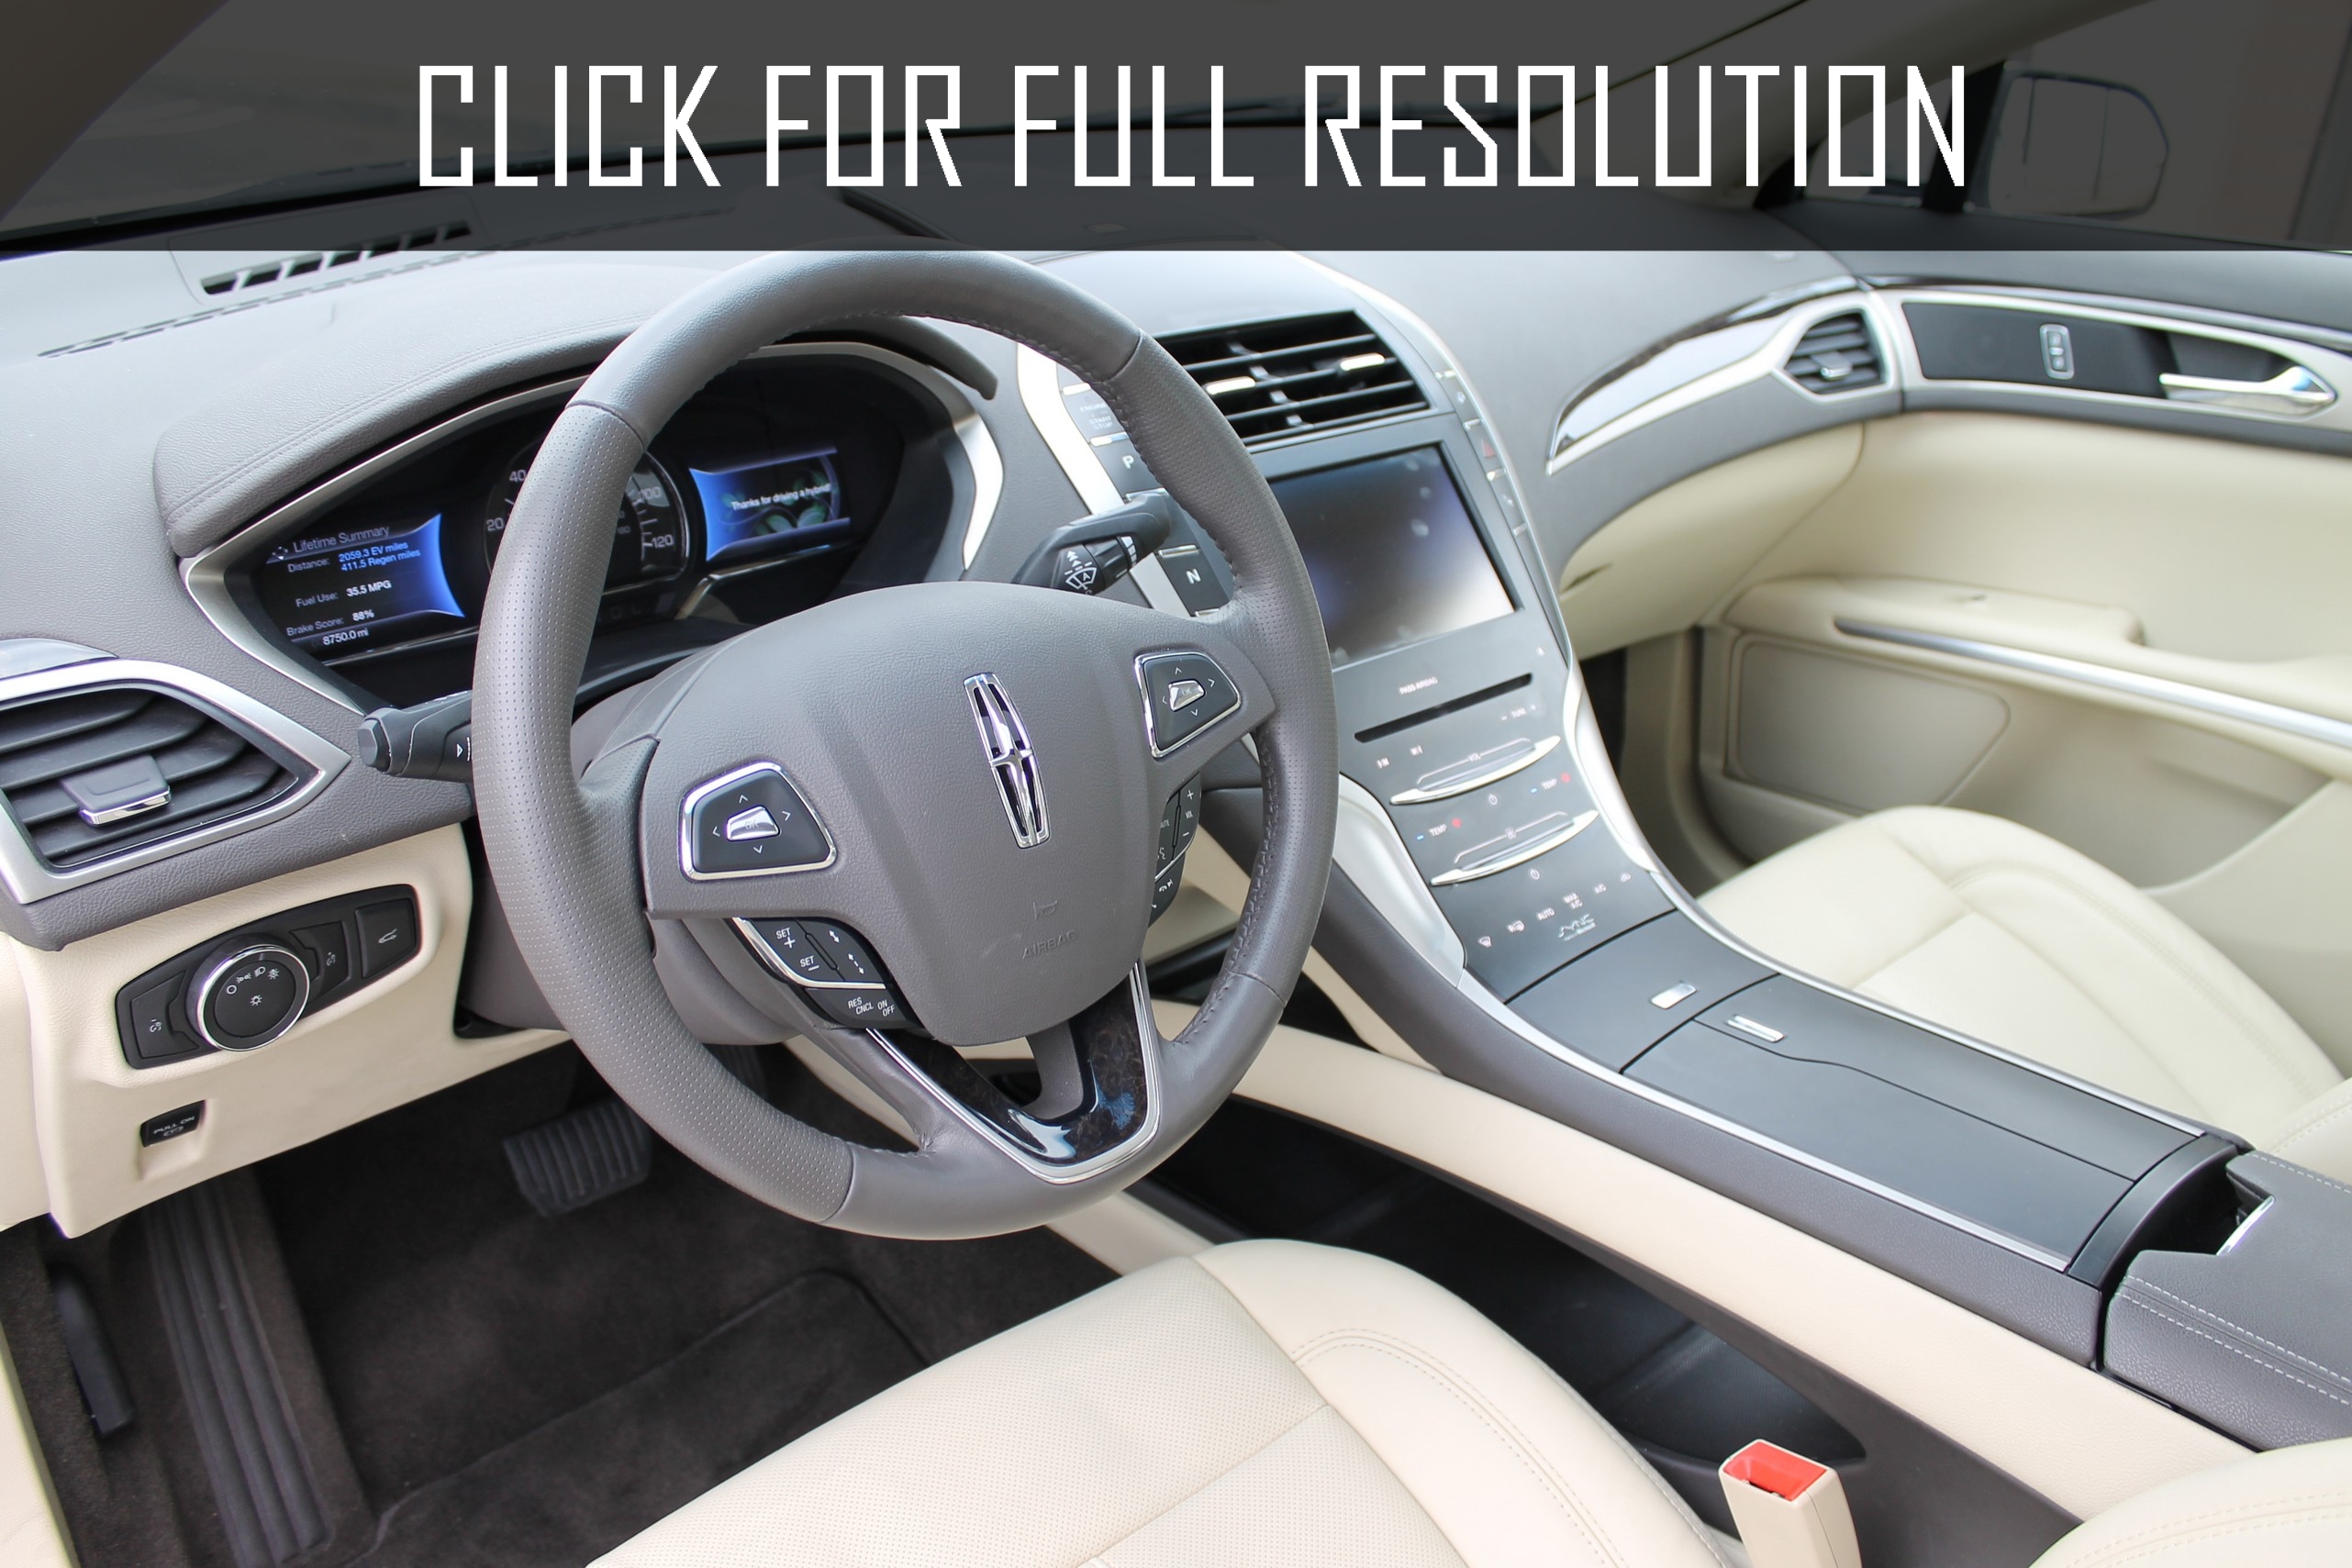 2010 Lincoln Mkz Hybrid Best Image Gallery 13 14 Share